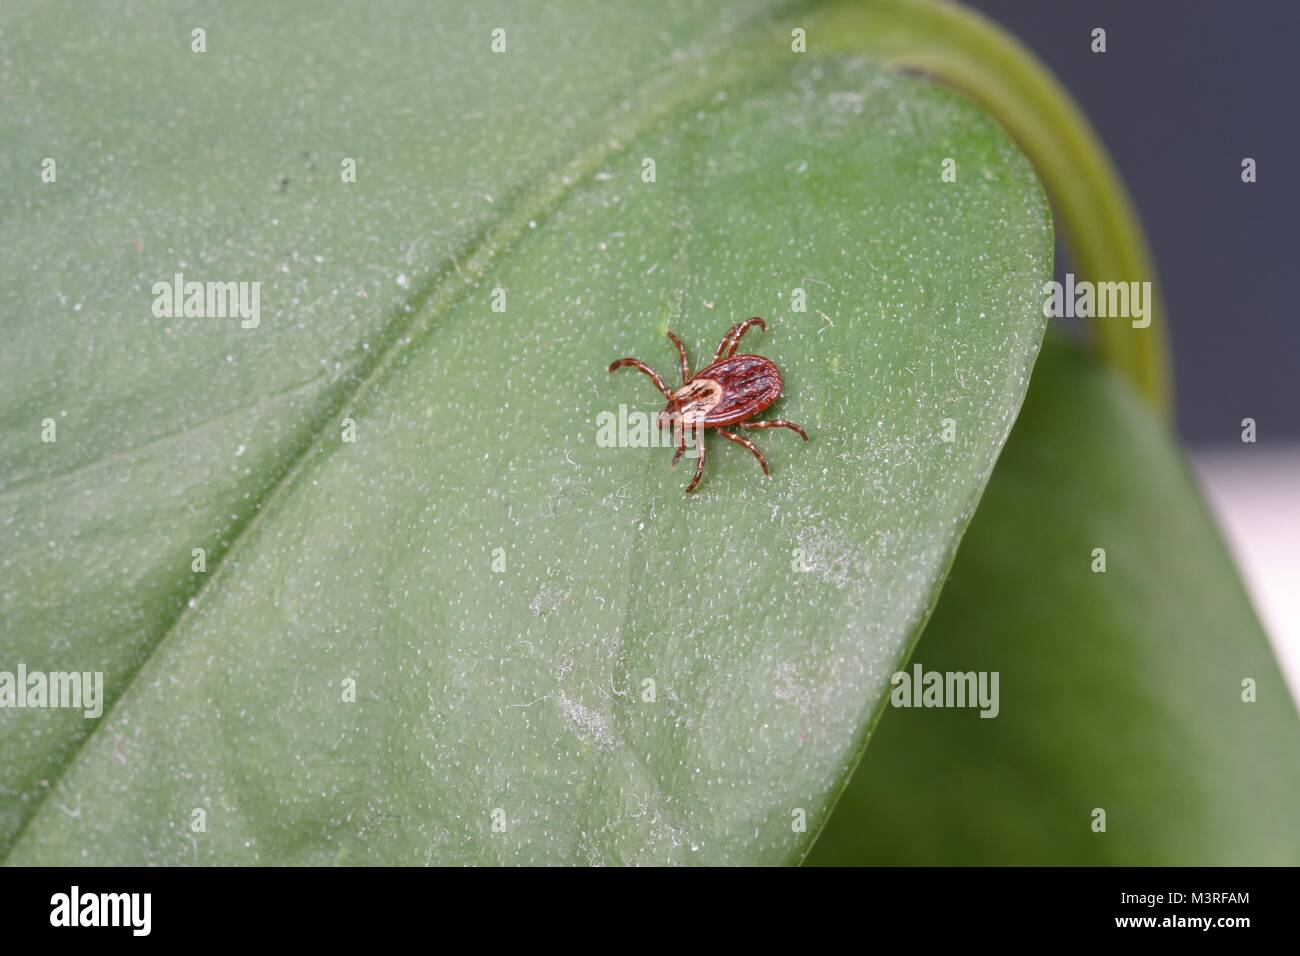 Dermacentor variabilis, also known as the American Dog Tick on a plant - This species of tick is known to carry bacteria responsible for several disea Stock Photo